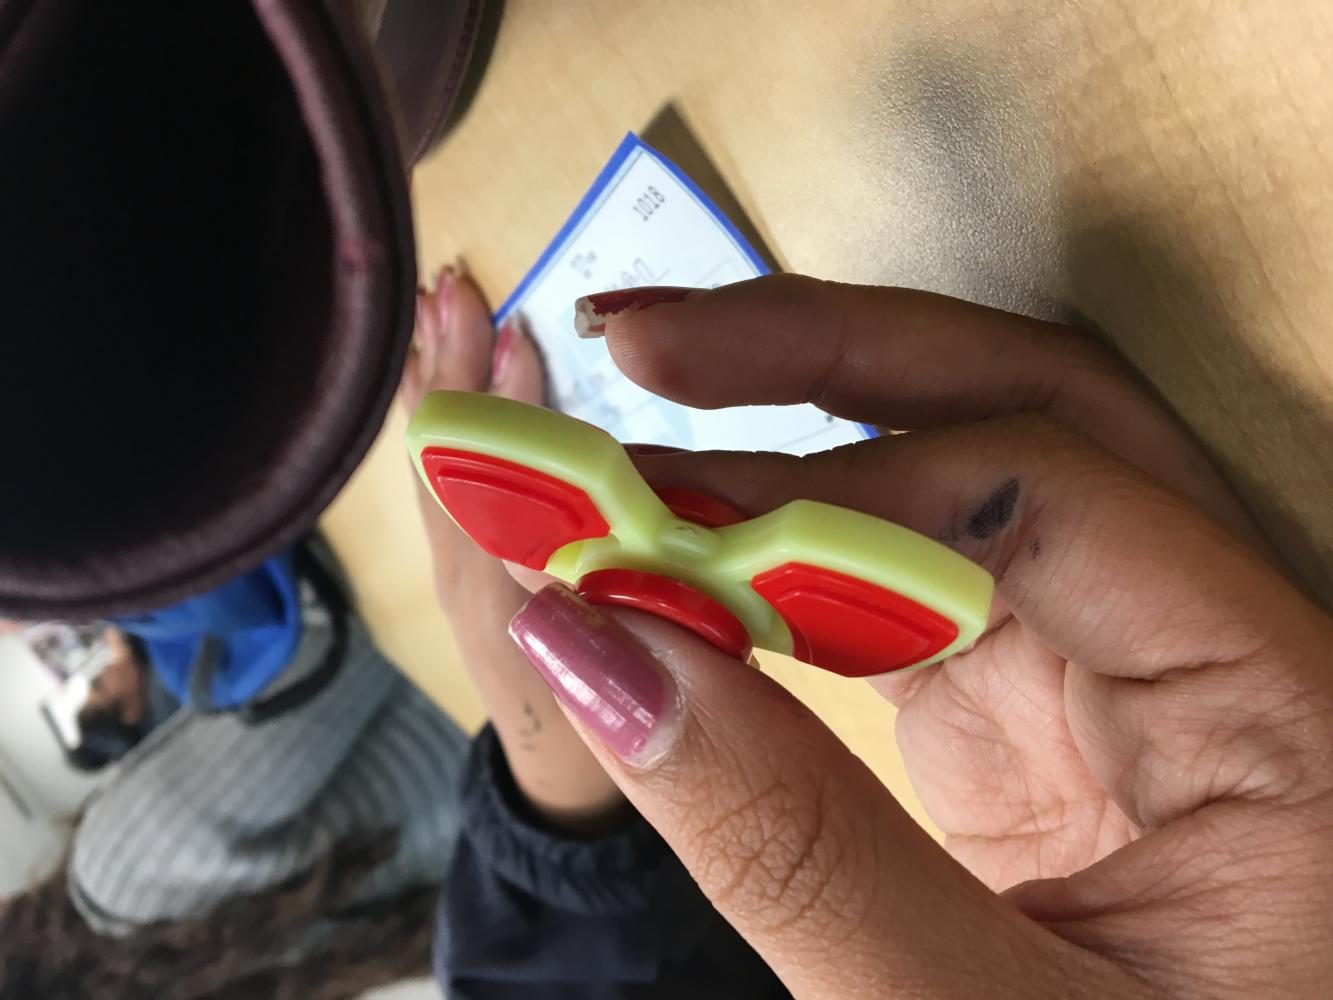 Student plays with fidget spinner